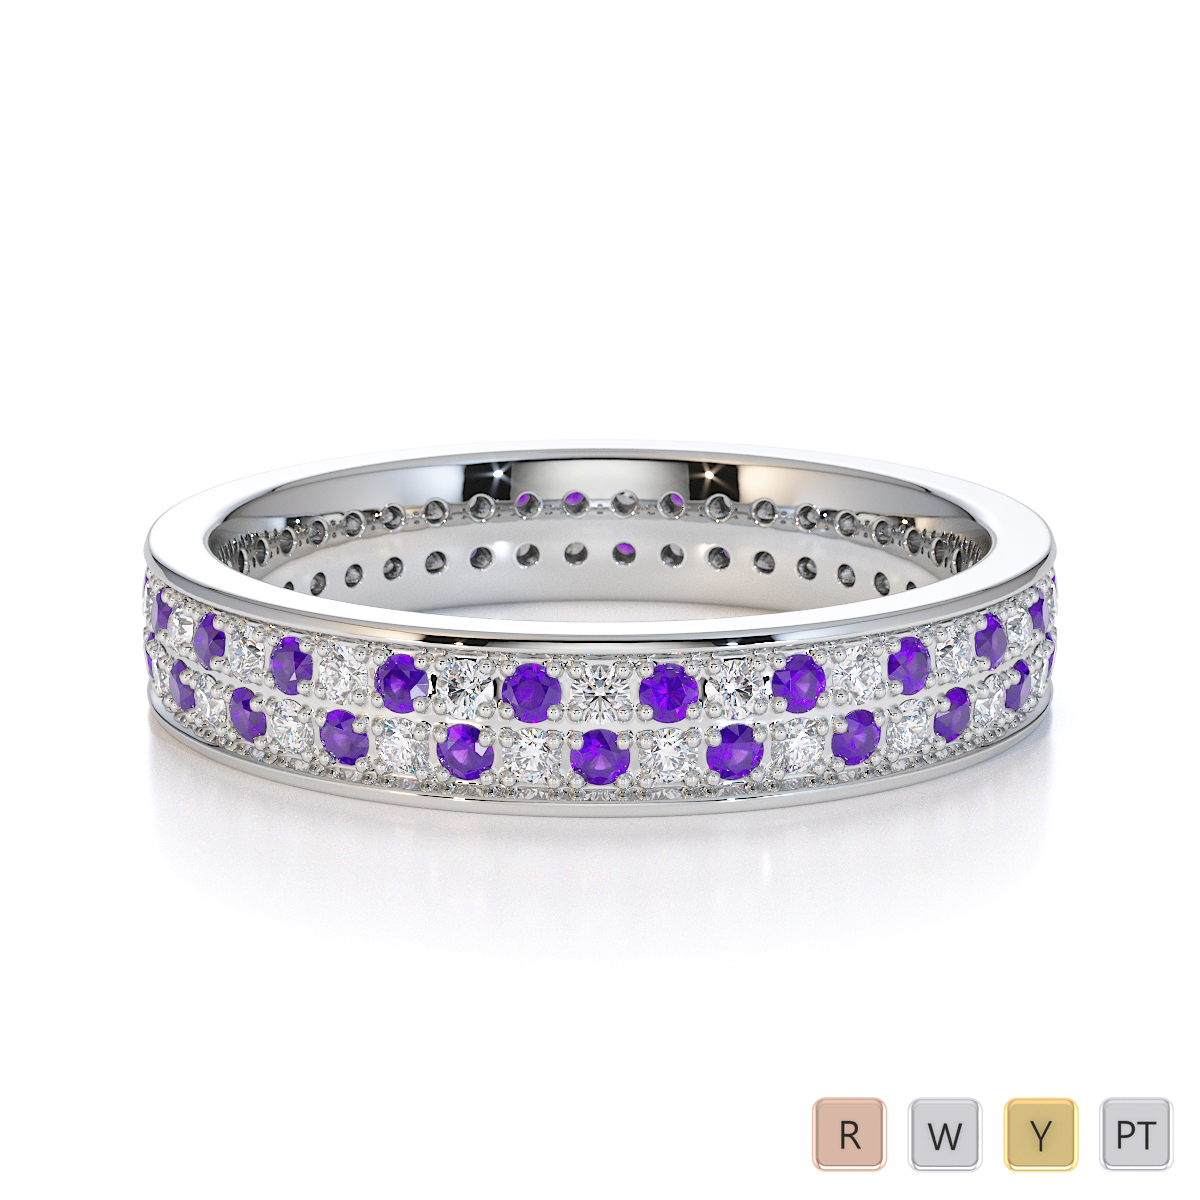 Prong Set Amethyst and Diamond Full Eternity Ring in Gold / Platinum ATZR-0430